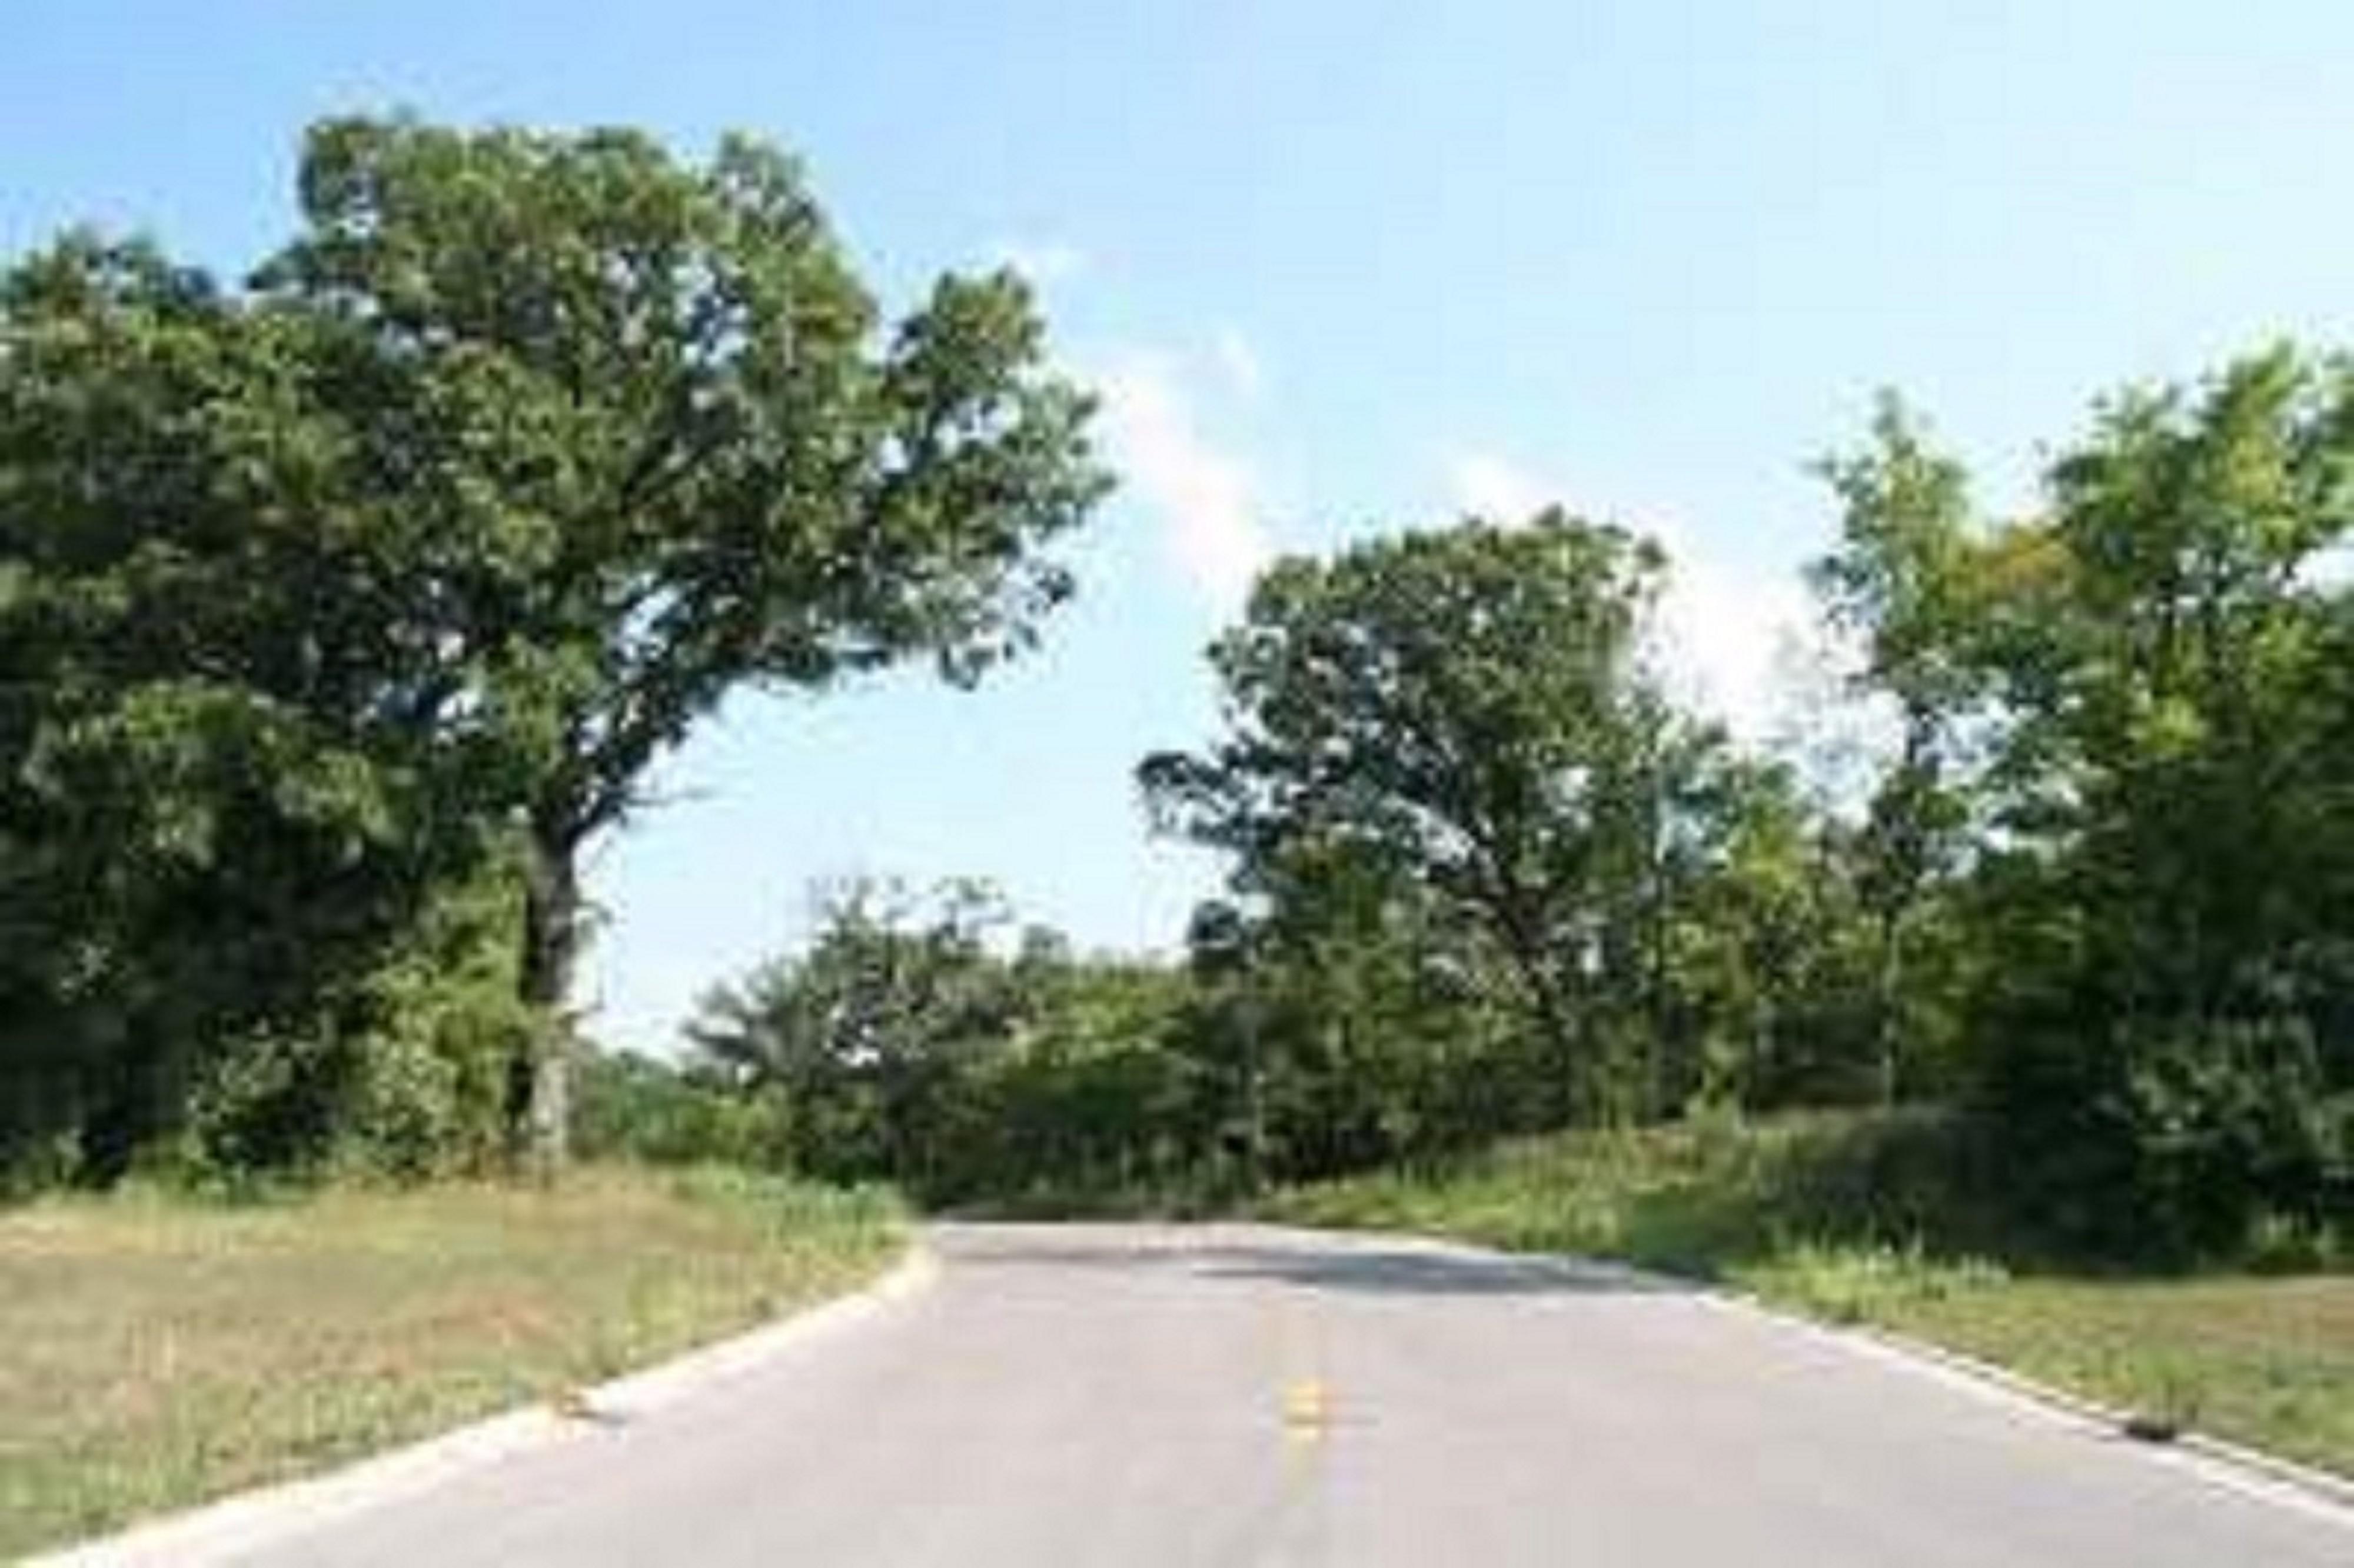 Property Image for 957 Thomas Dr., Lot 5